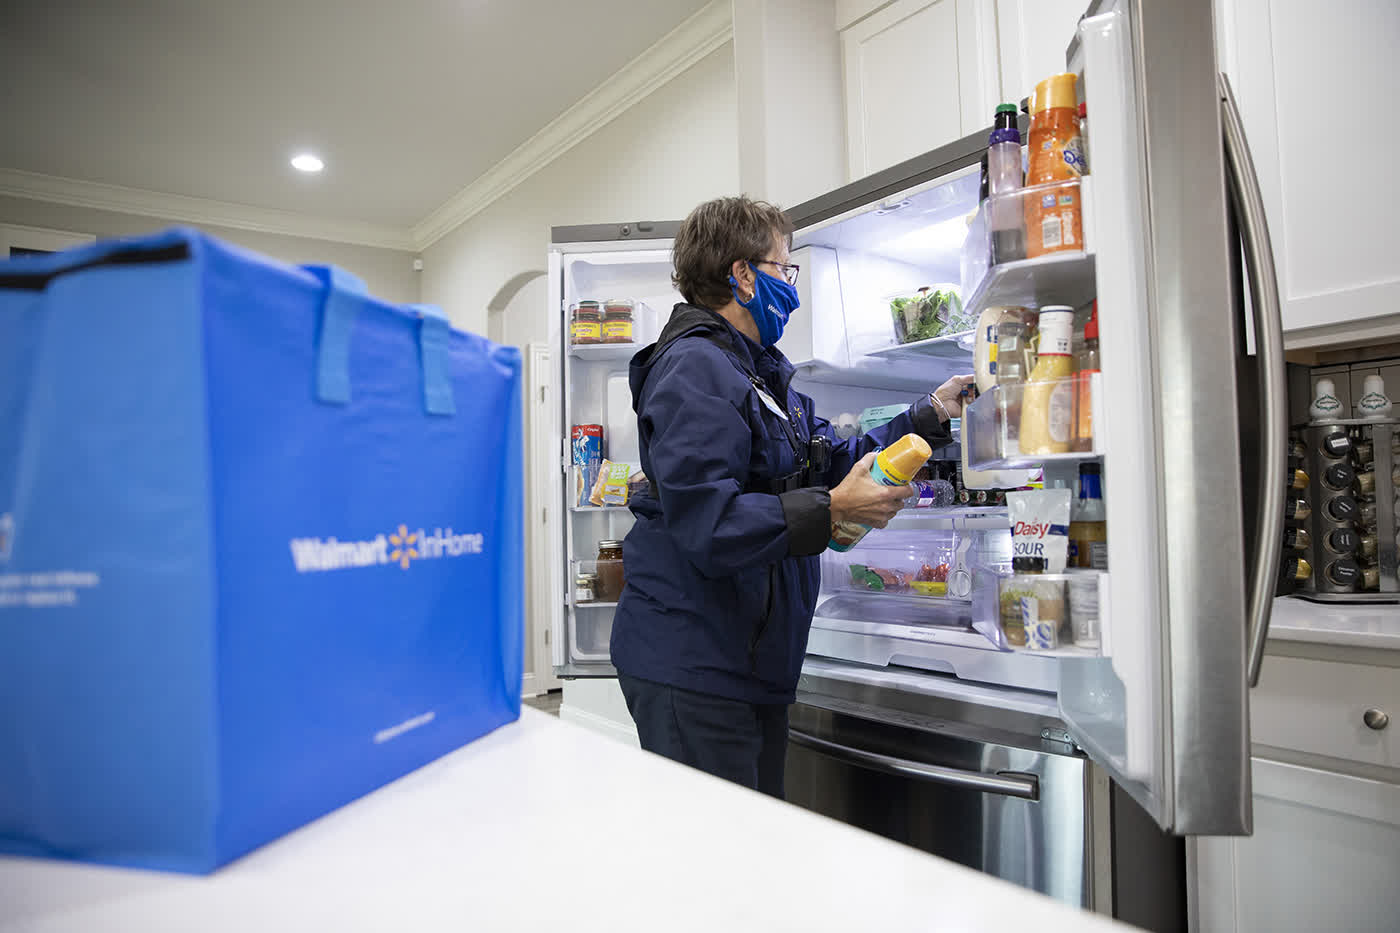 Walmart will expand InHome delivery service to reach 30 million homes by year's end